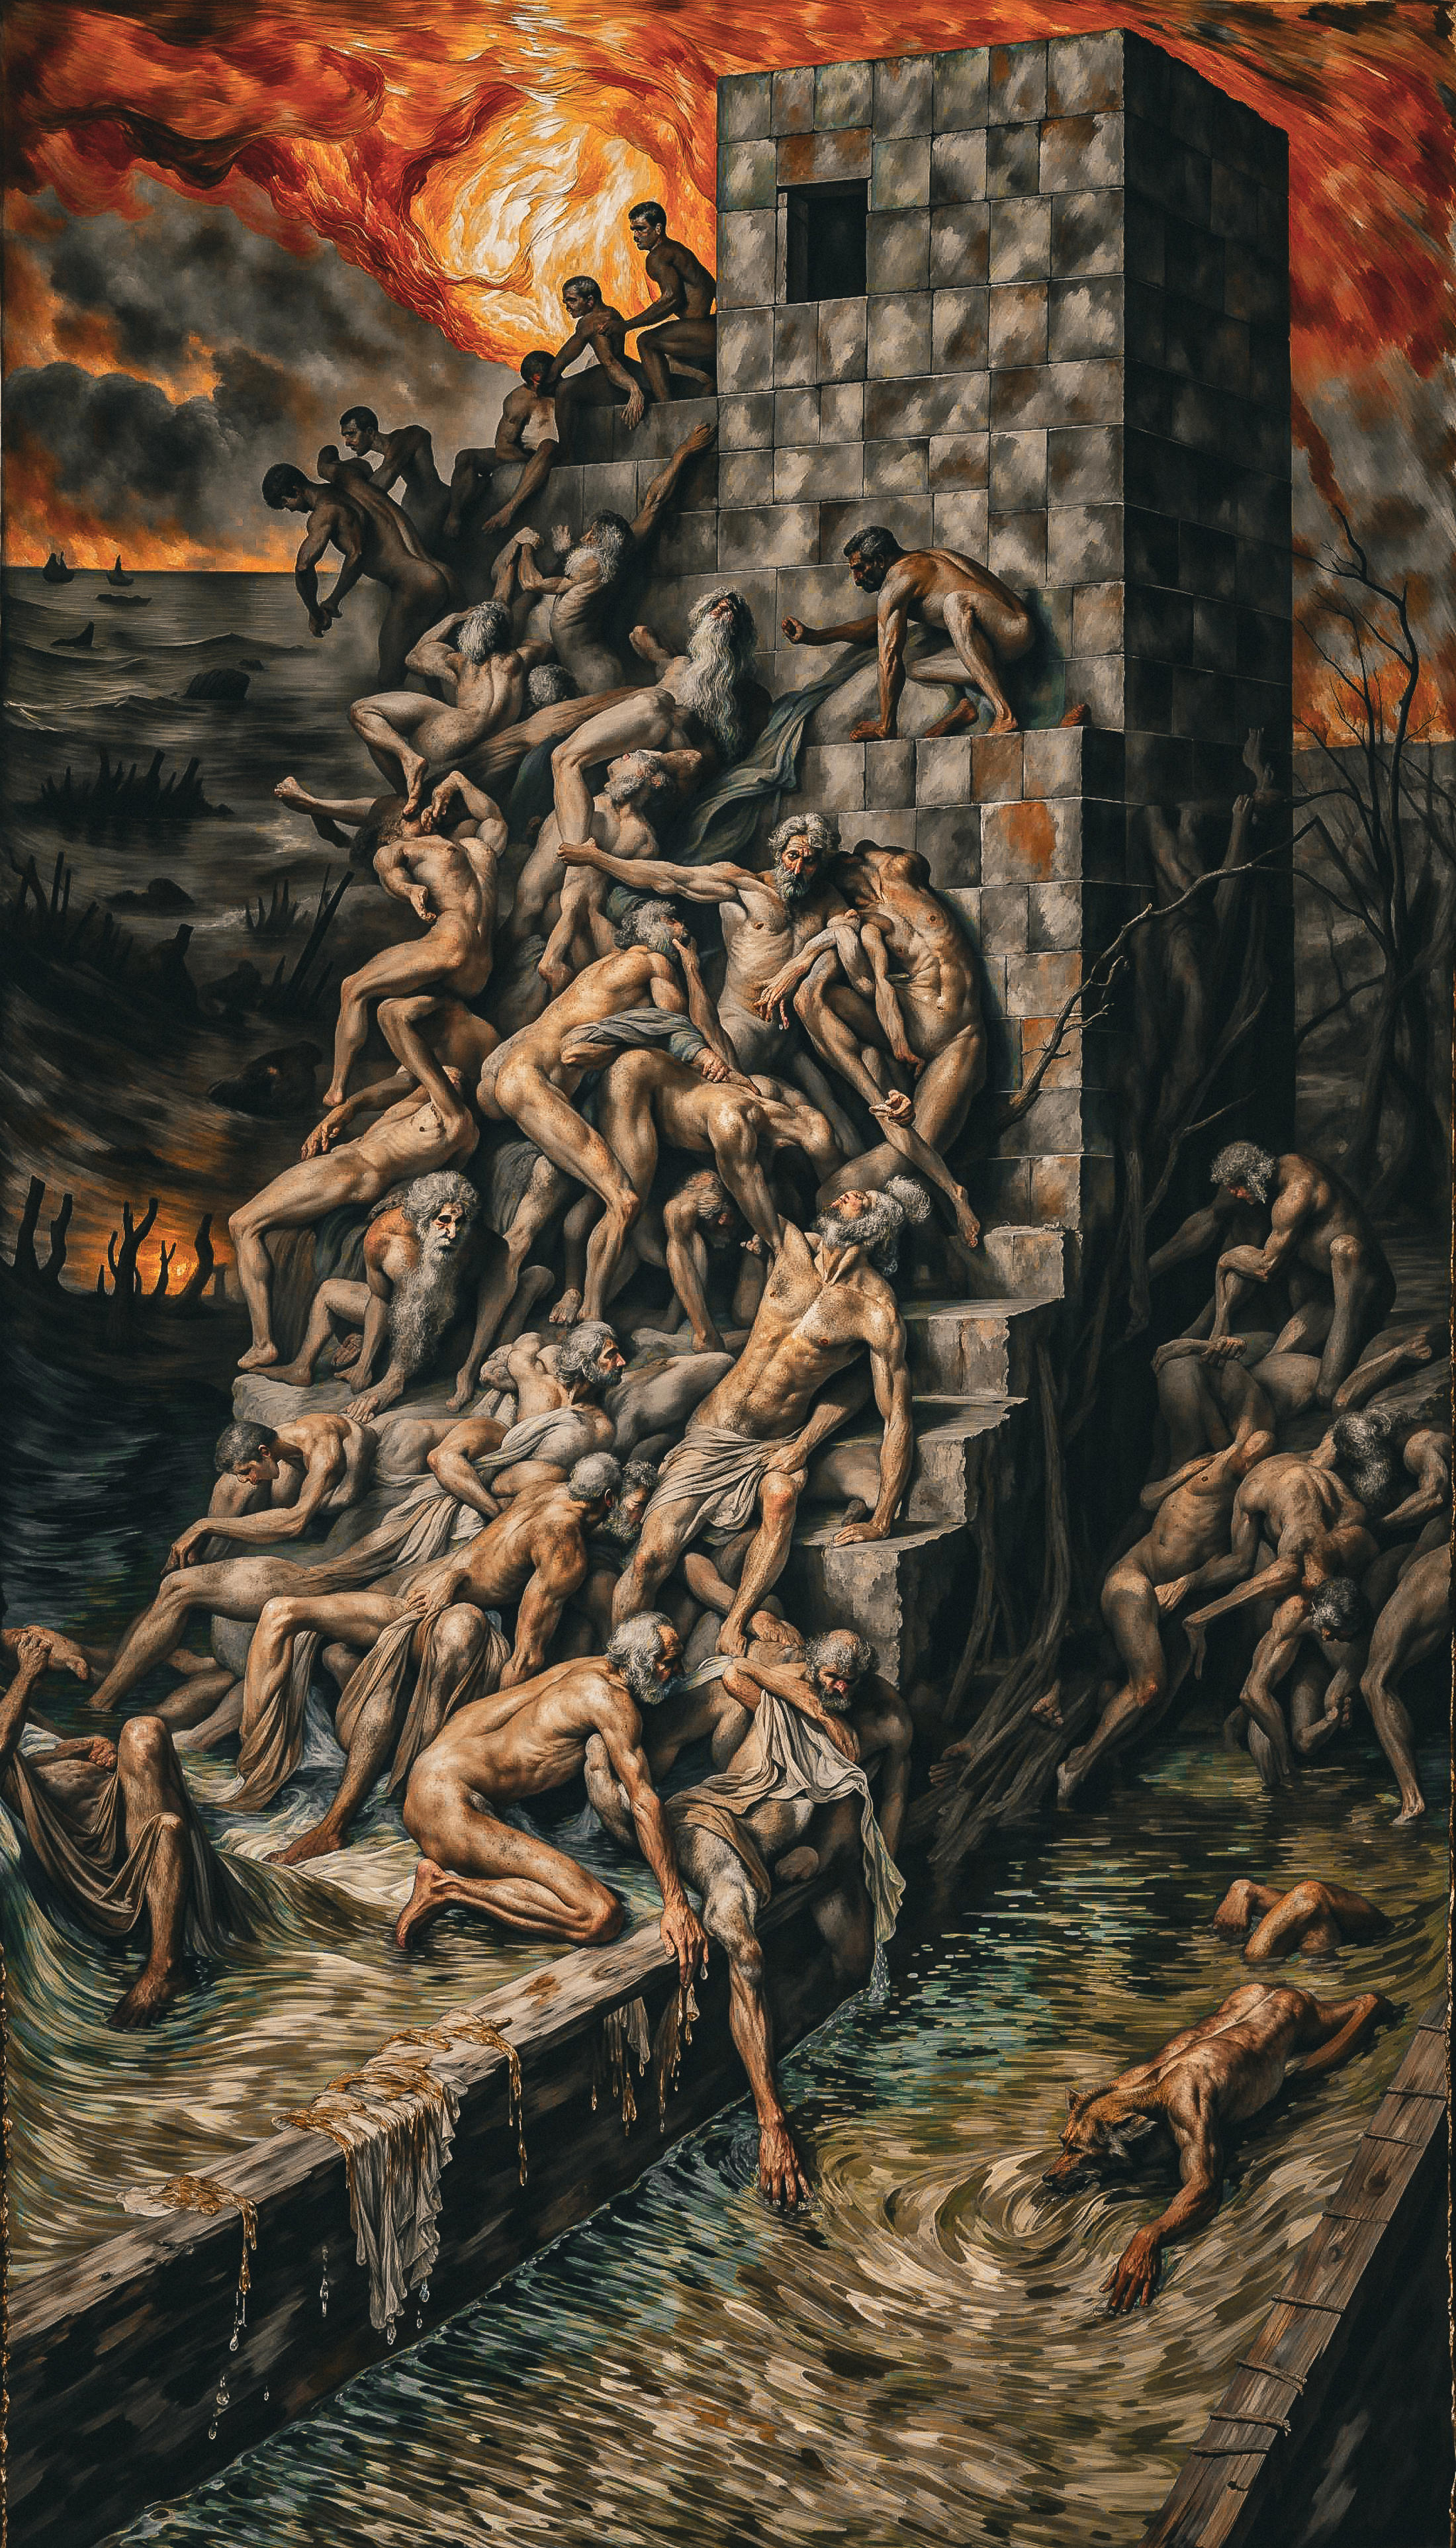 The image shows a large group of naked people gathered around a waterfall and a tower. The people are standing and sitting in various positions, creating a sense of community and togetherness. Some of them are closer to the waterfall, while others are near the tower, possibly exploring the area or enjoying the natural surroundings. The group's nudity suggests a connection with nature and an emphasis on the human form in this artistic portrayal.